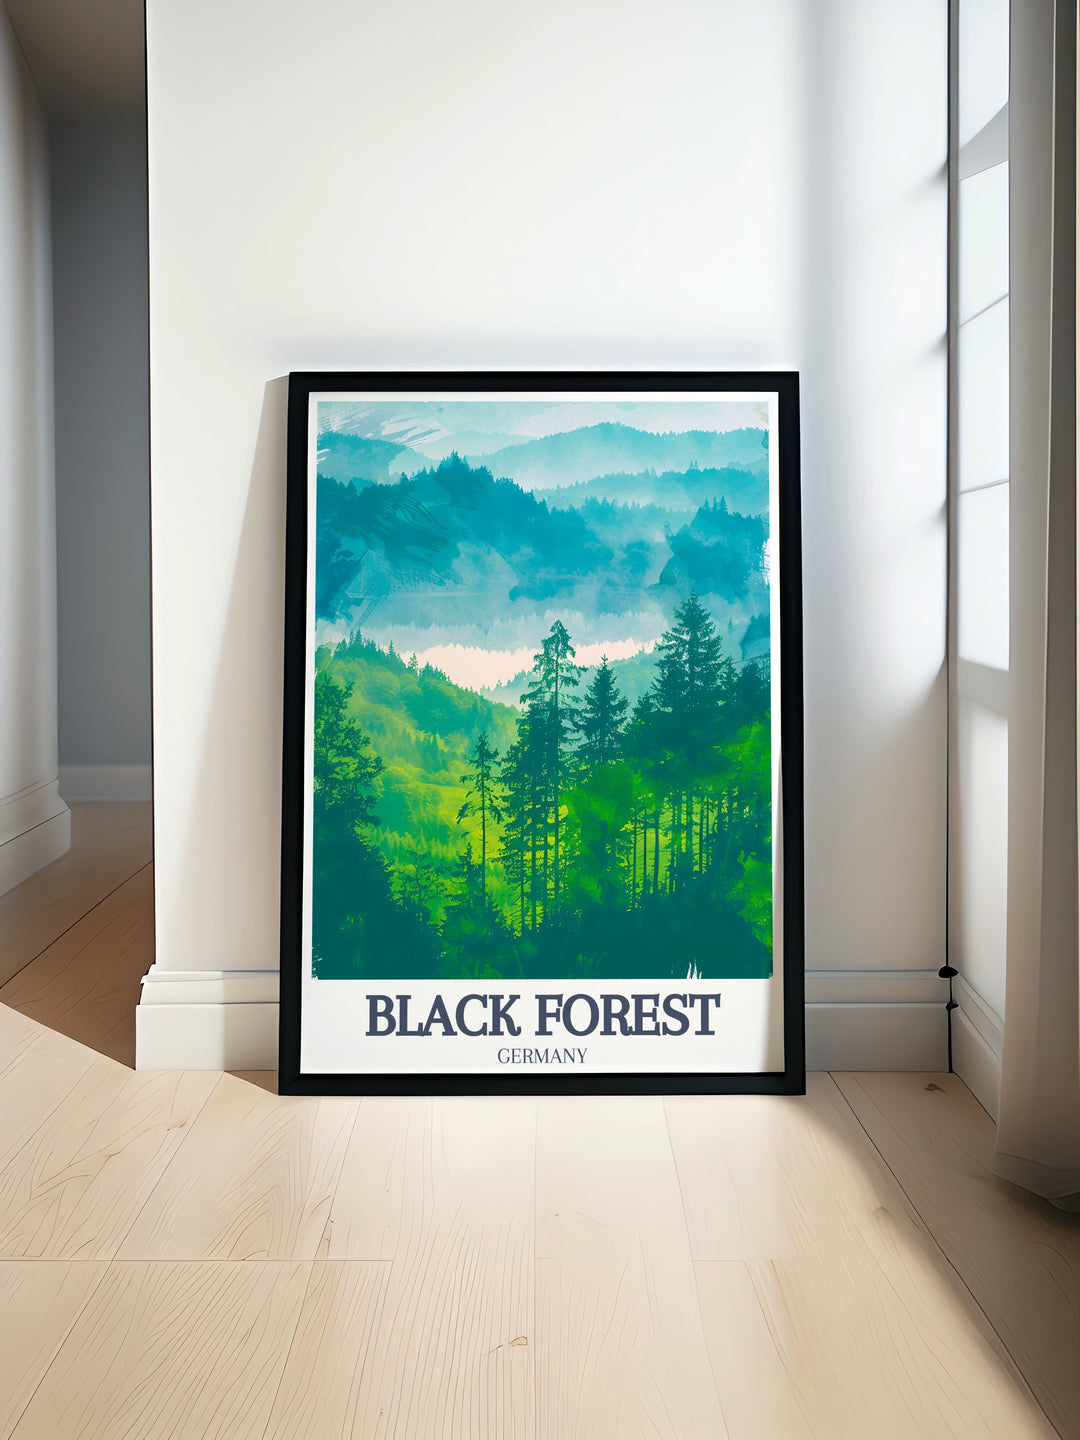 Mummelsee Lake, Baden Wurttemberg scenic view captured in a stunning Germany Forest Print featuring the enchanting Schwarzwald landscape ideal for Black Forest decor and nature inspired home decor a perfect gift for those who love German travel art and serene forest scenes